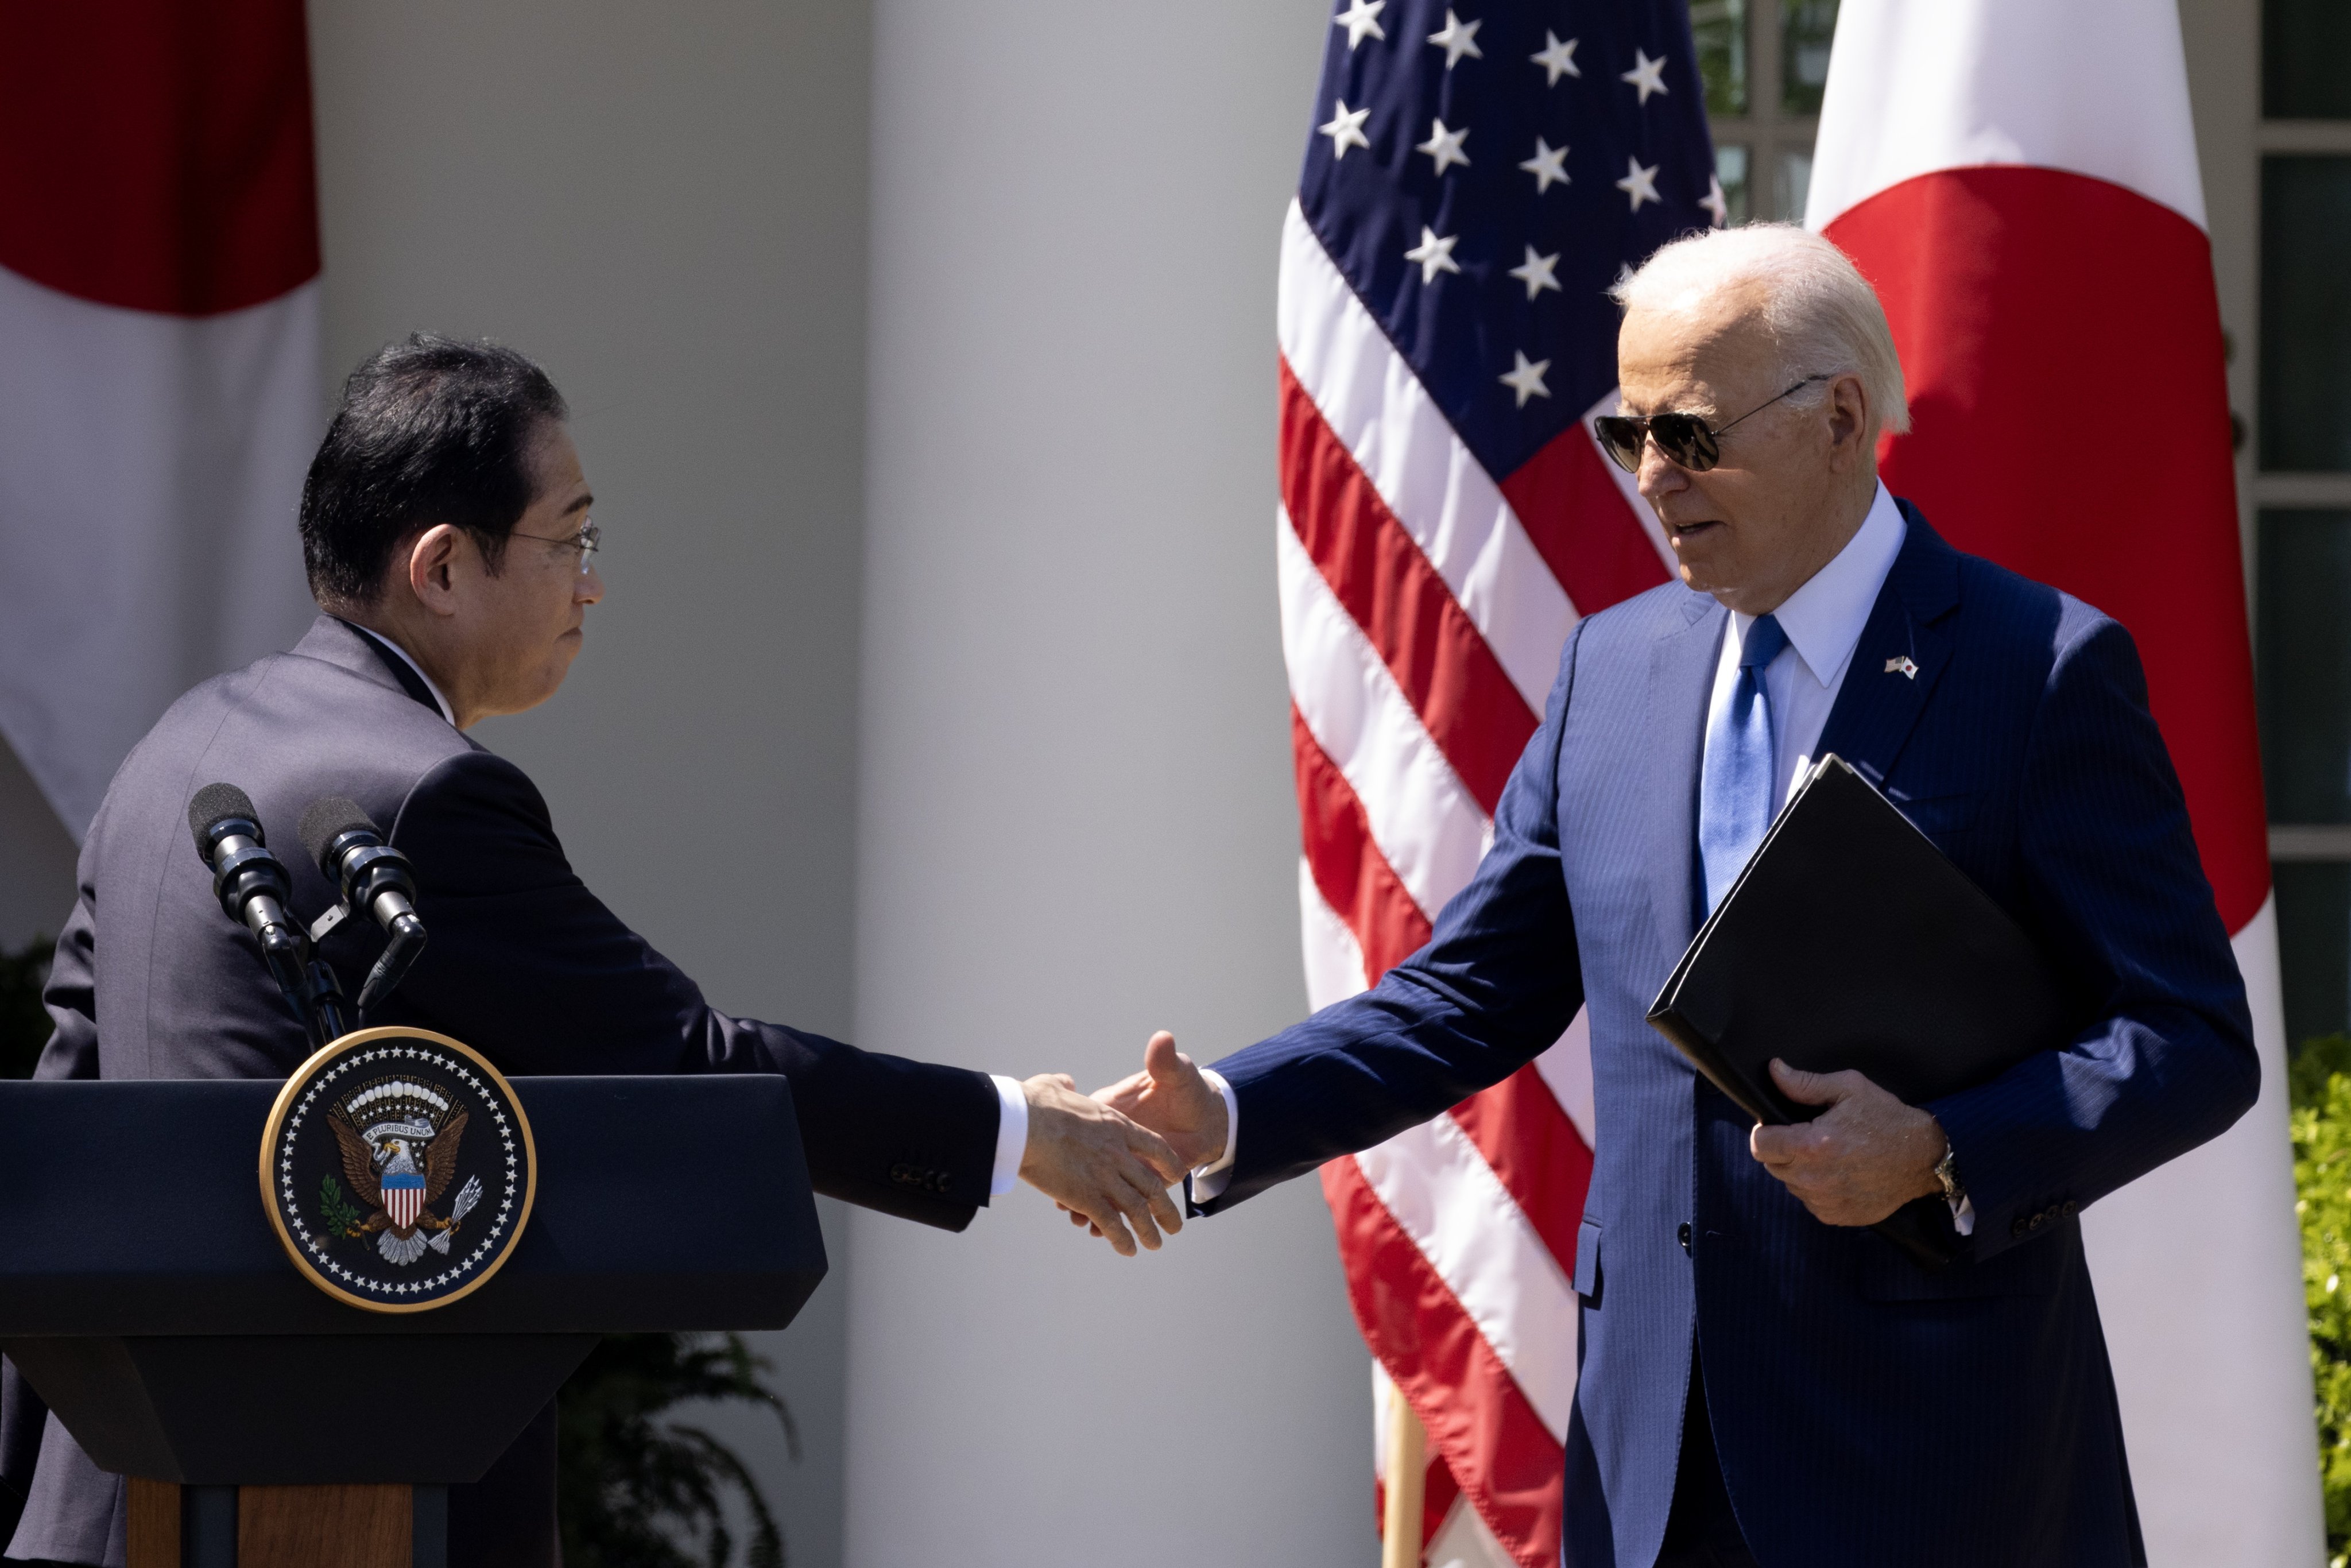 Japanese Prime Minister Fumio Kishida (left) and US President Joe Biden shake hands at the conclusion of their joint news conference in the White House Rose Garden in Washington on Wednesday. Photo: EPA-EFE